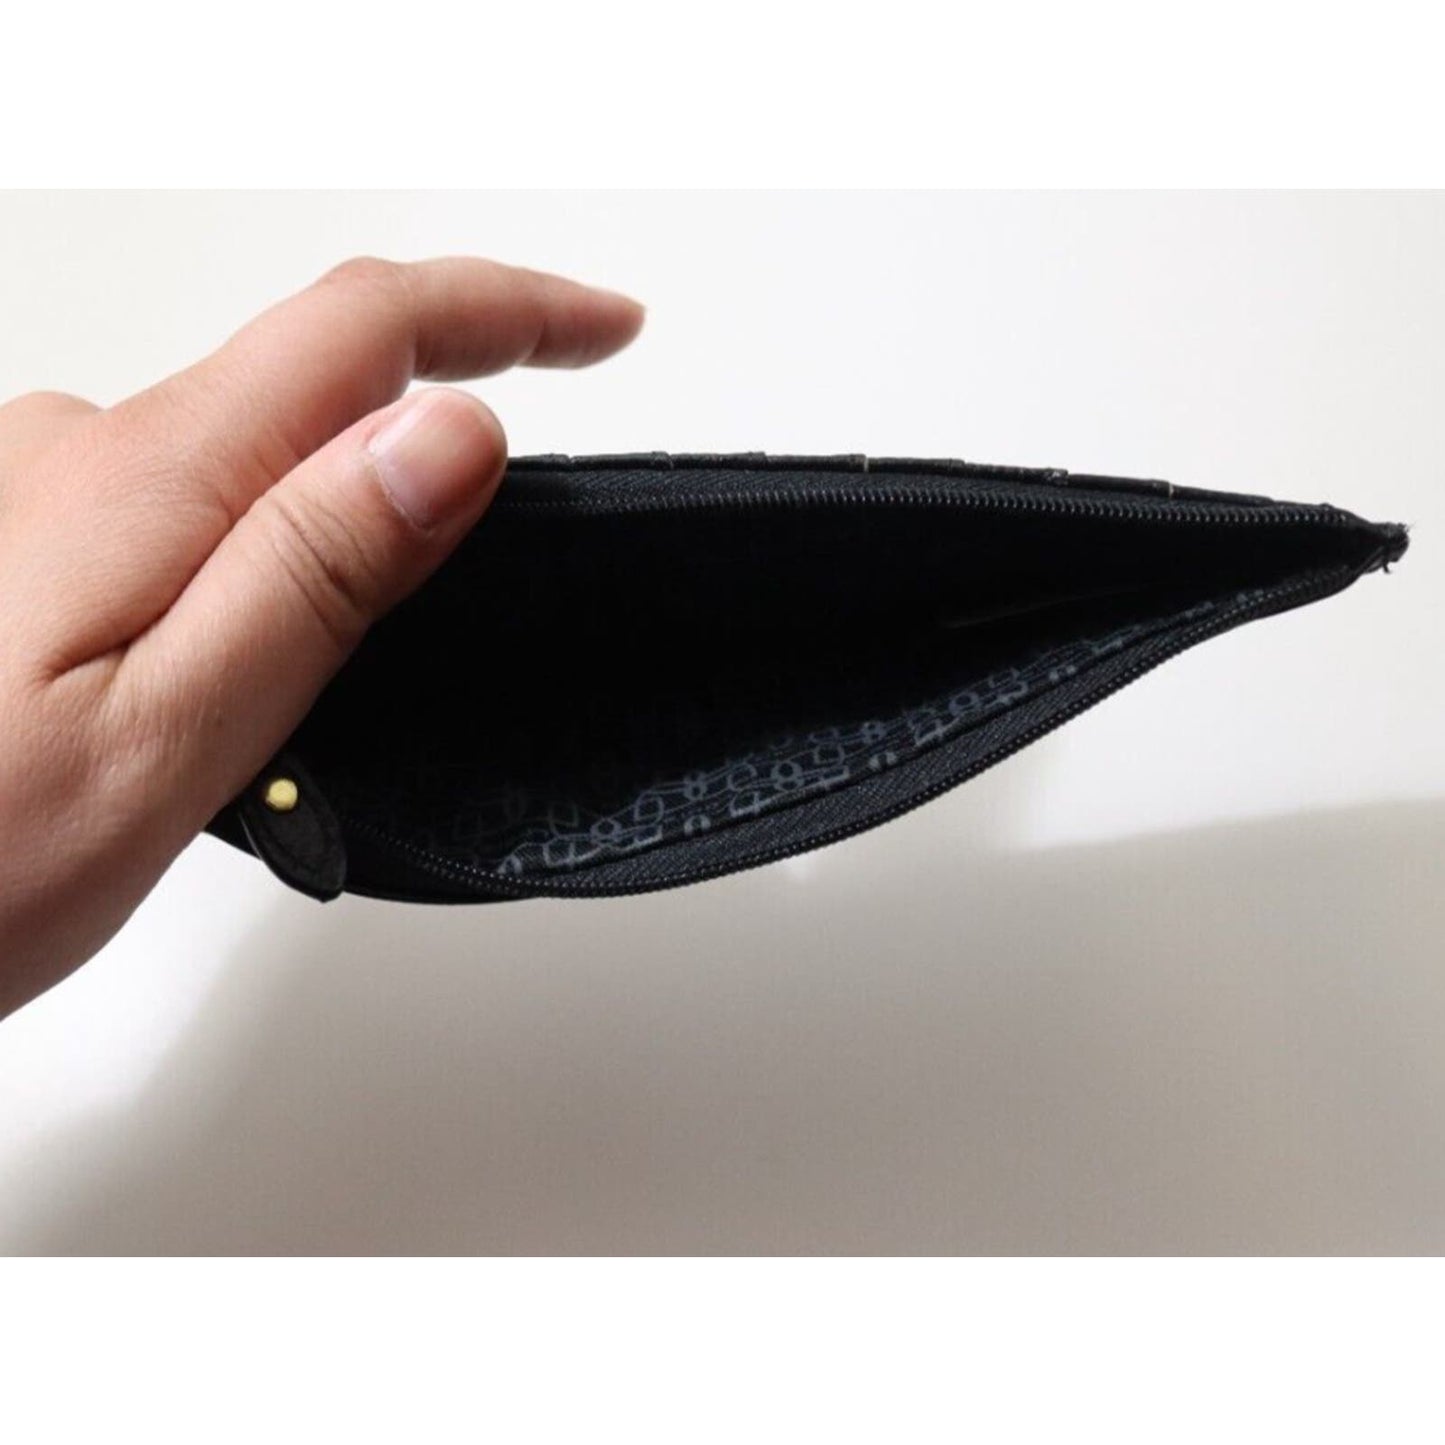 LODIS Credit Card Wallet BLACK Coin PURSE Leather Small For Small Bags.